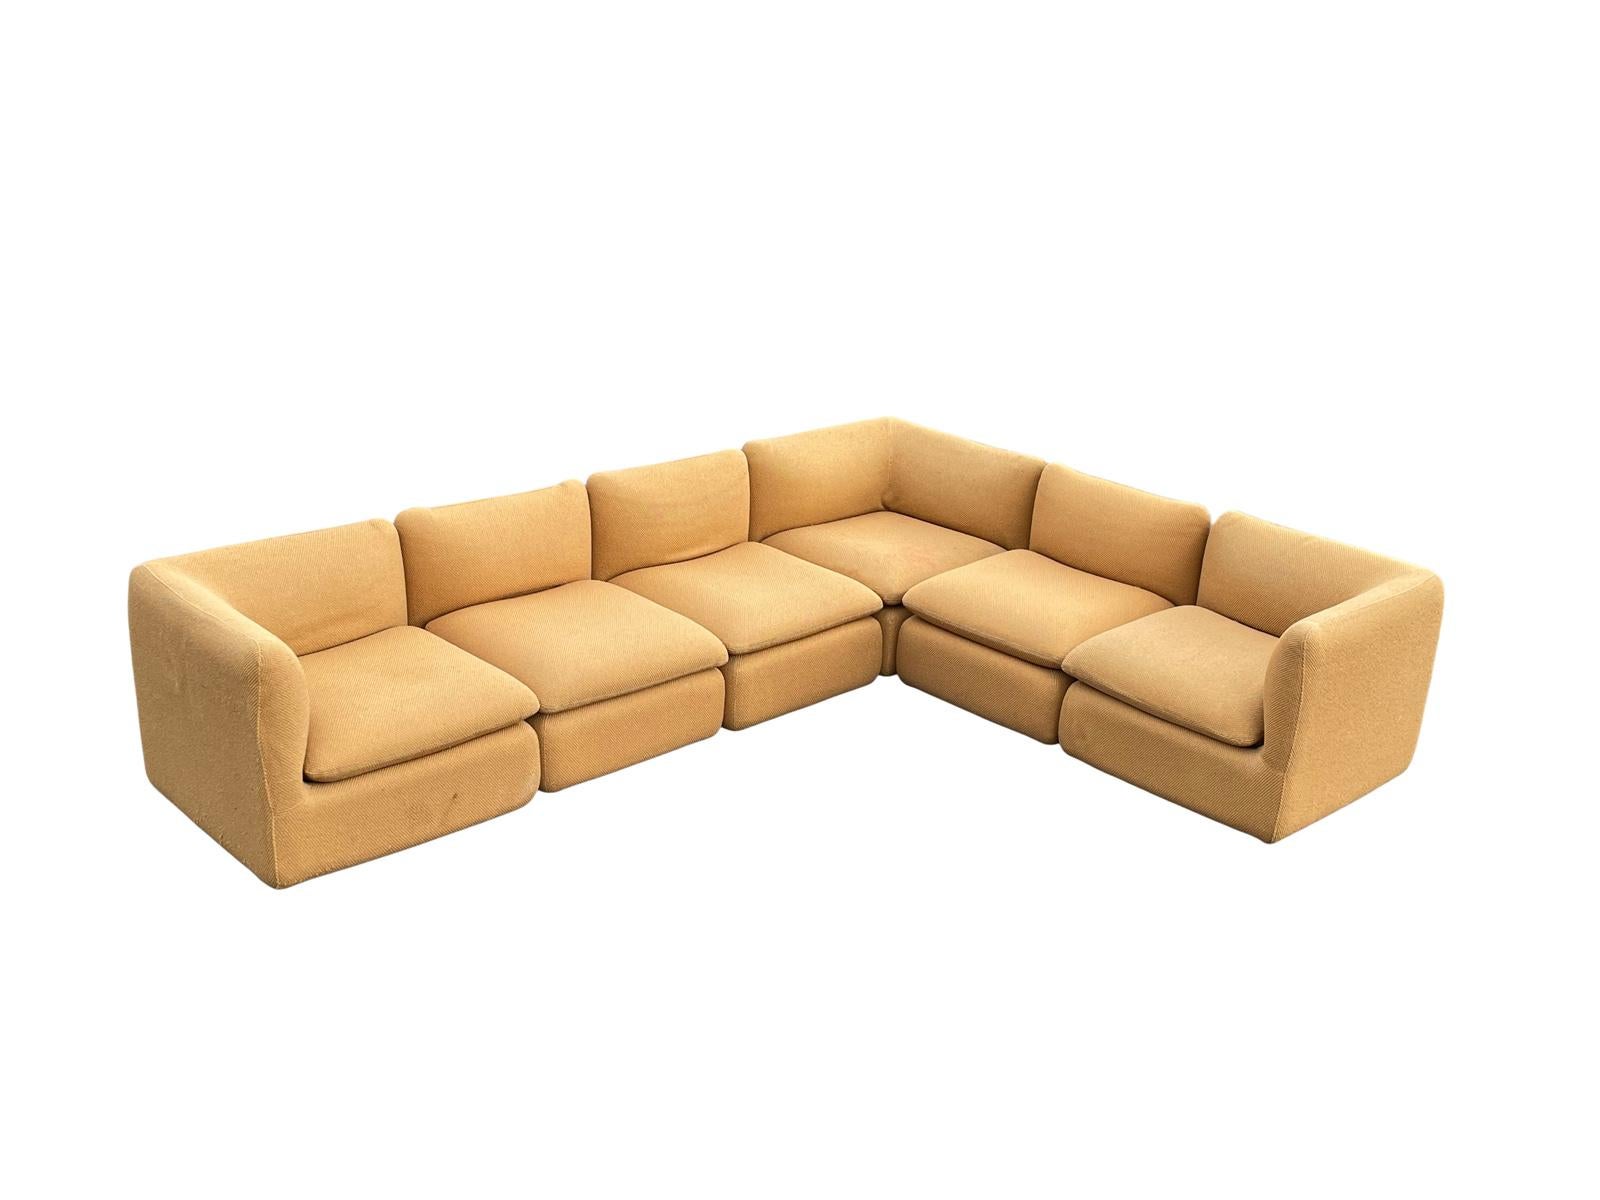 1980s Modular Ganging ELYSÉE Sofa Unit Sectional by Steelcase  In Good Condition For Sale In Bensalem, PA